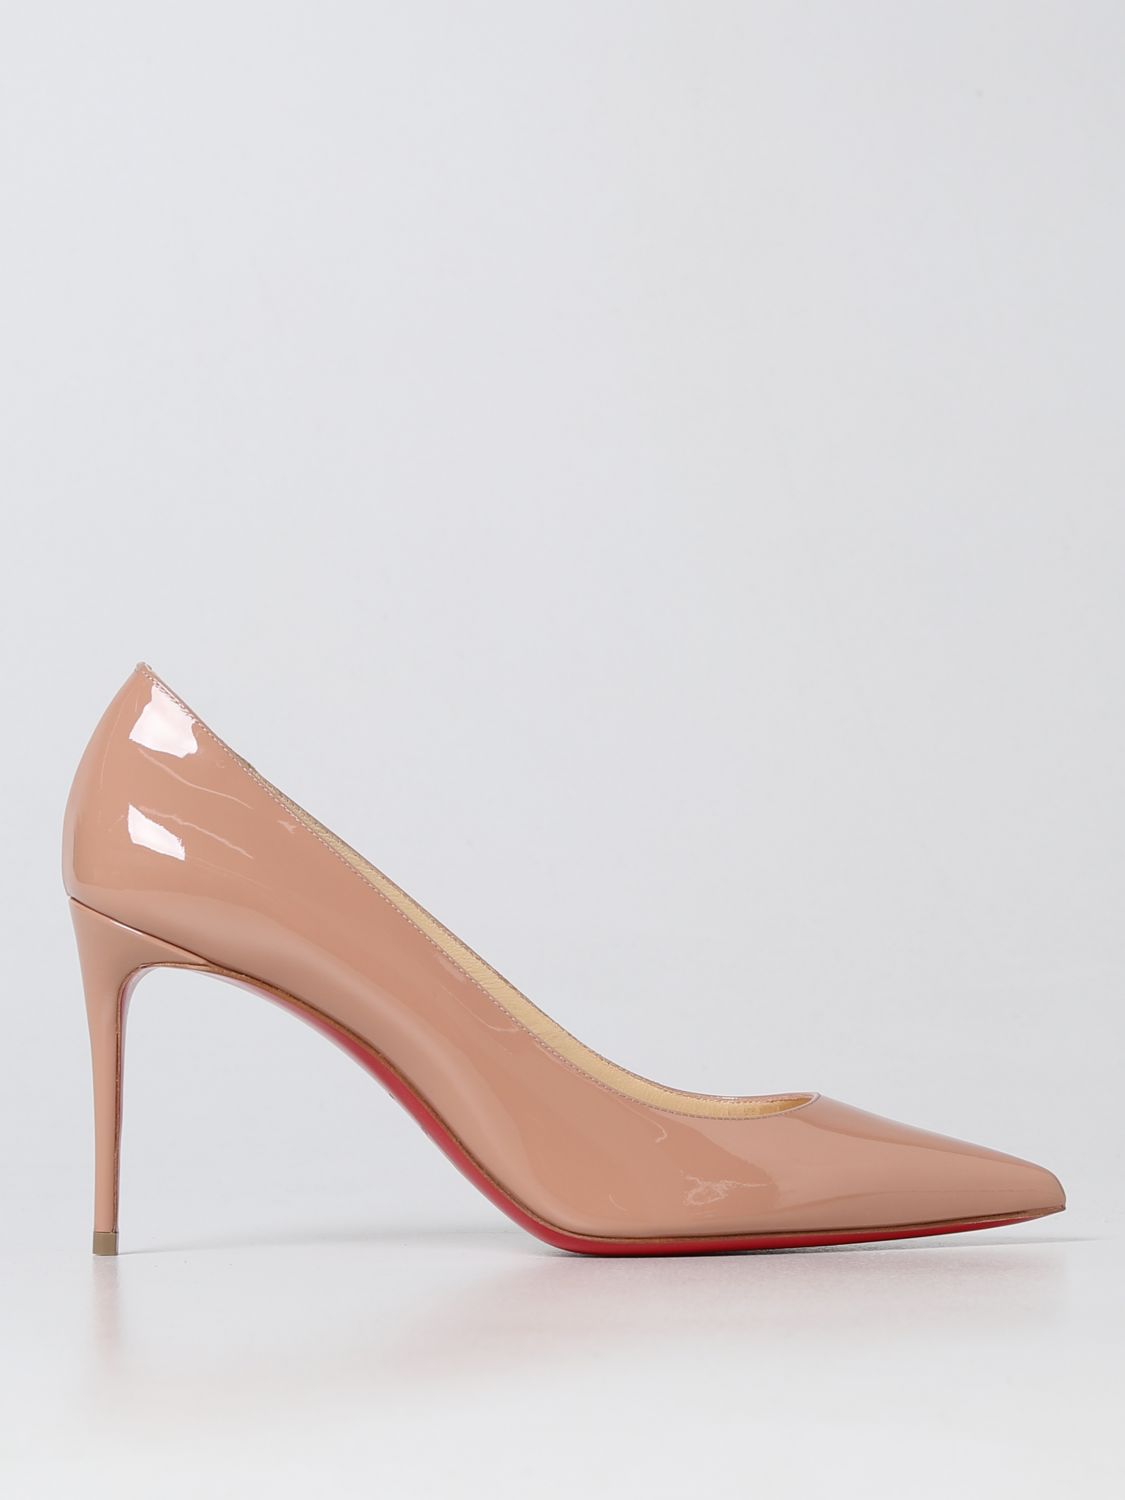 CHRISTIAN LOUBOUTIN: Kate patent pumps - Nude | Christian Louboutin high heel shoes online on GIGLIO.COM